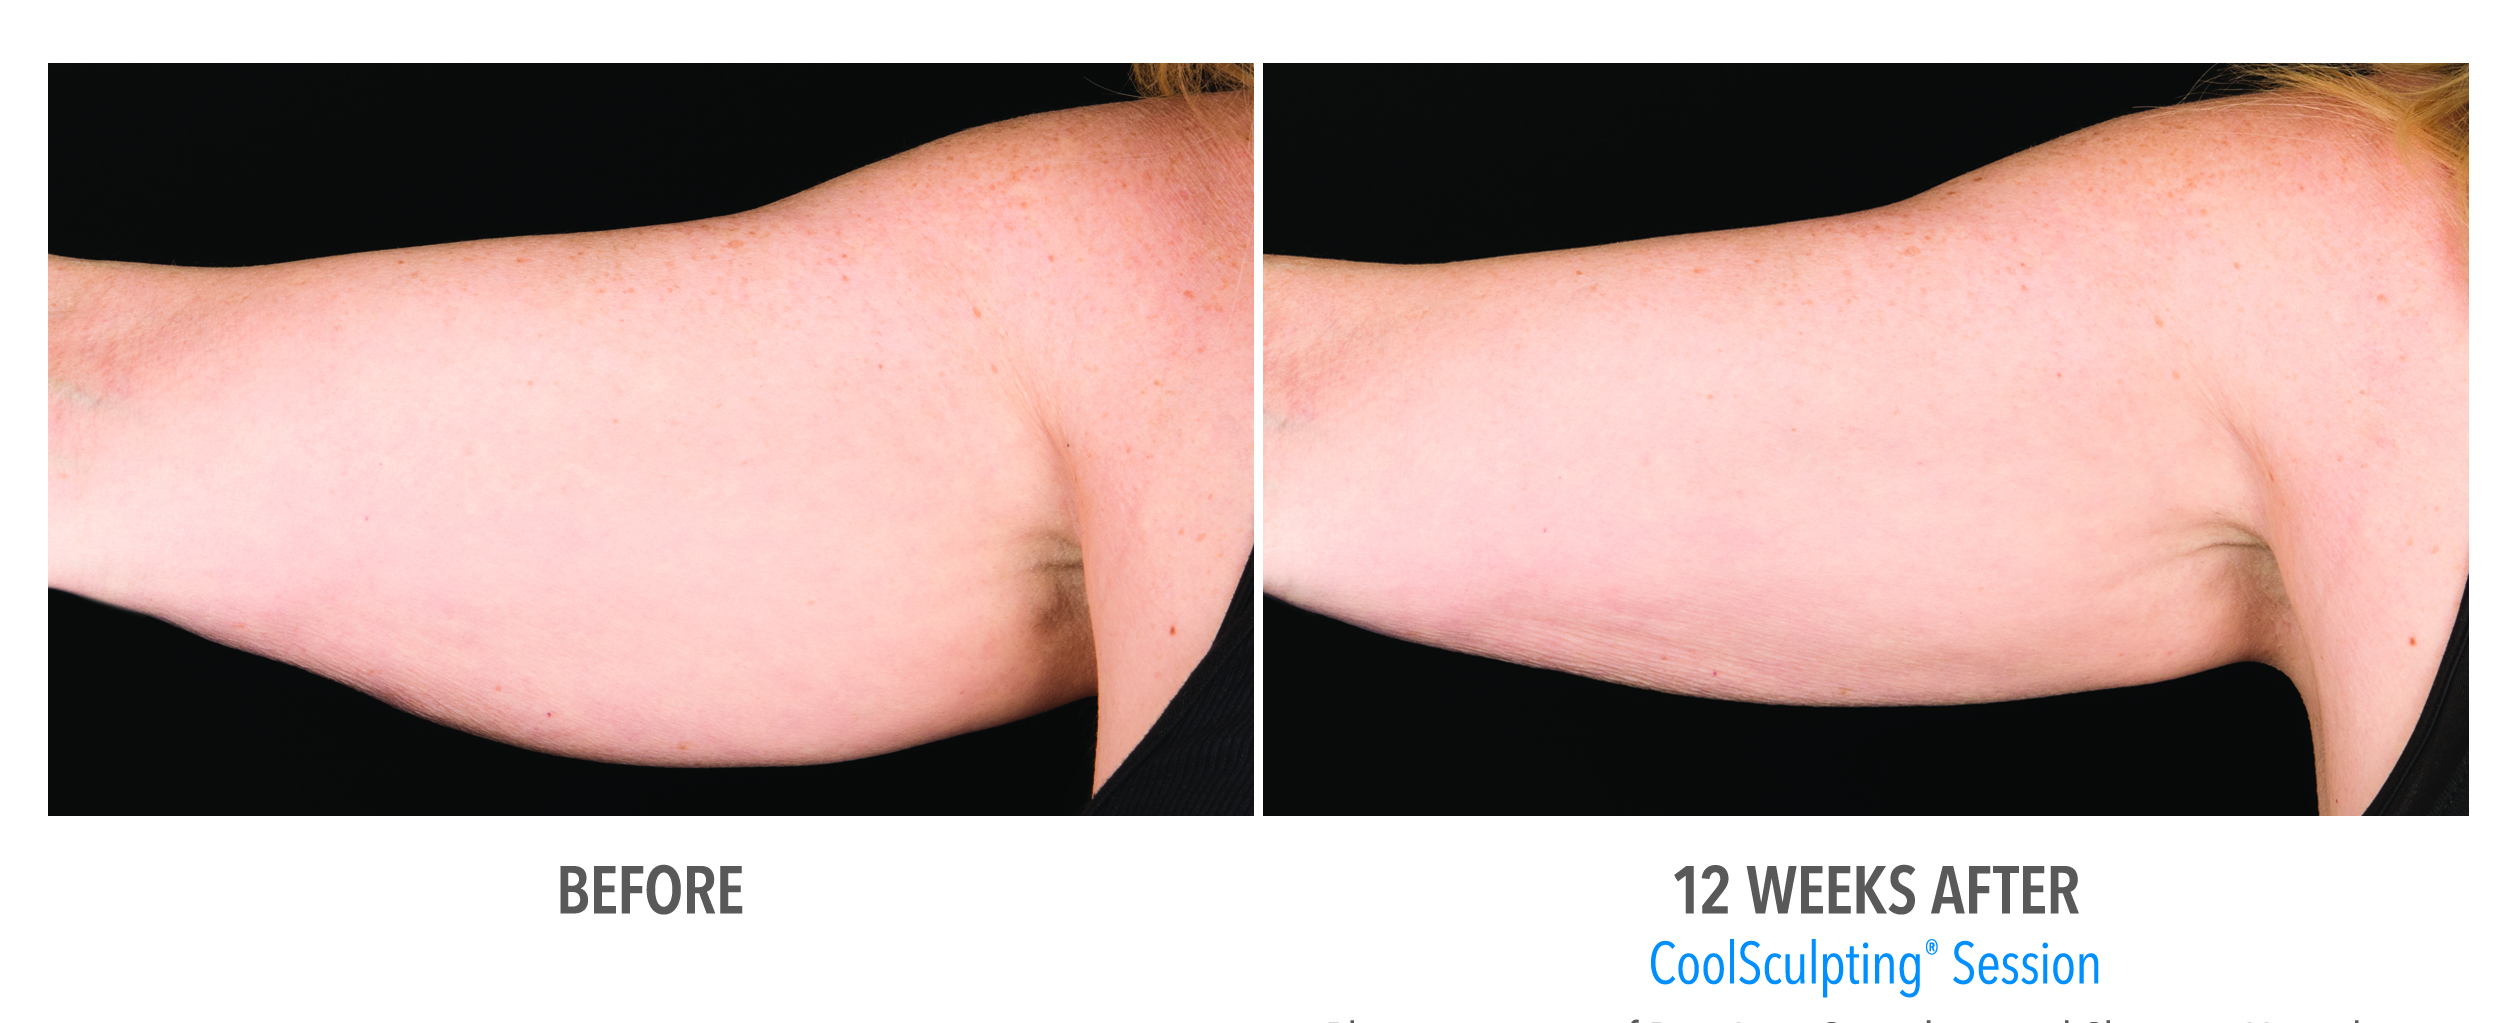 Get Rid of Flabby Arms With an Arm Lift in Lubbock